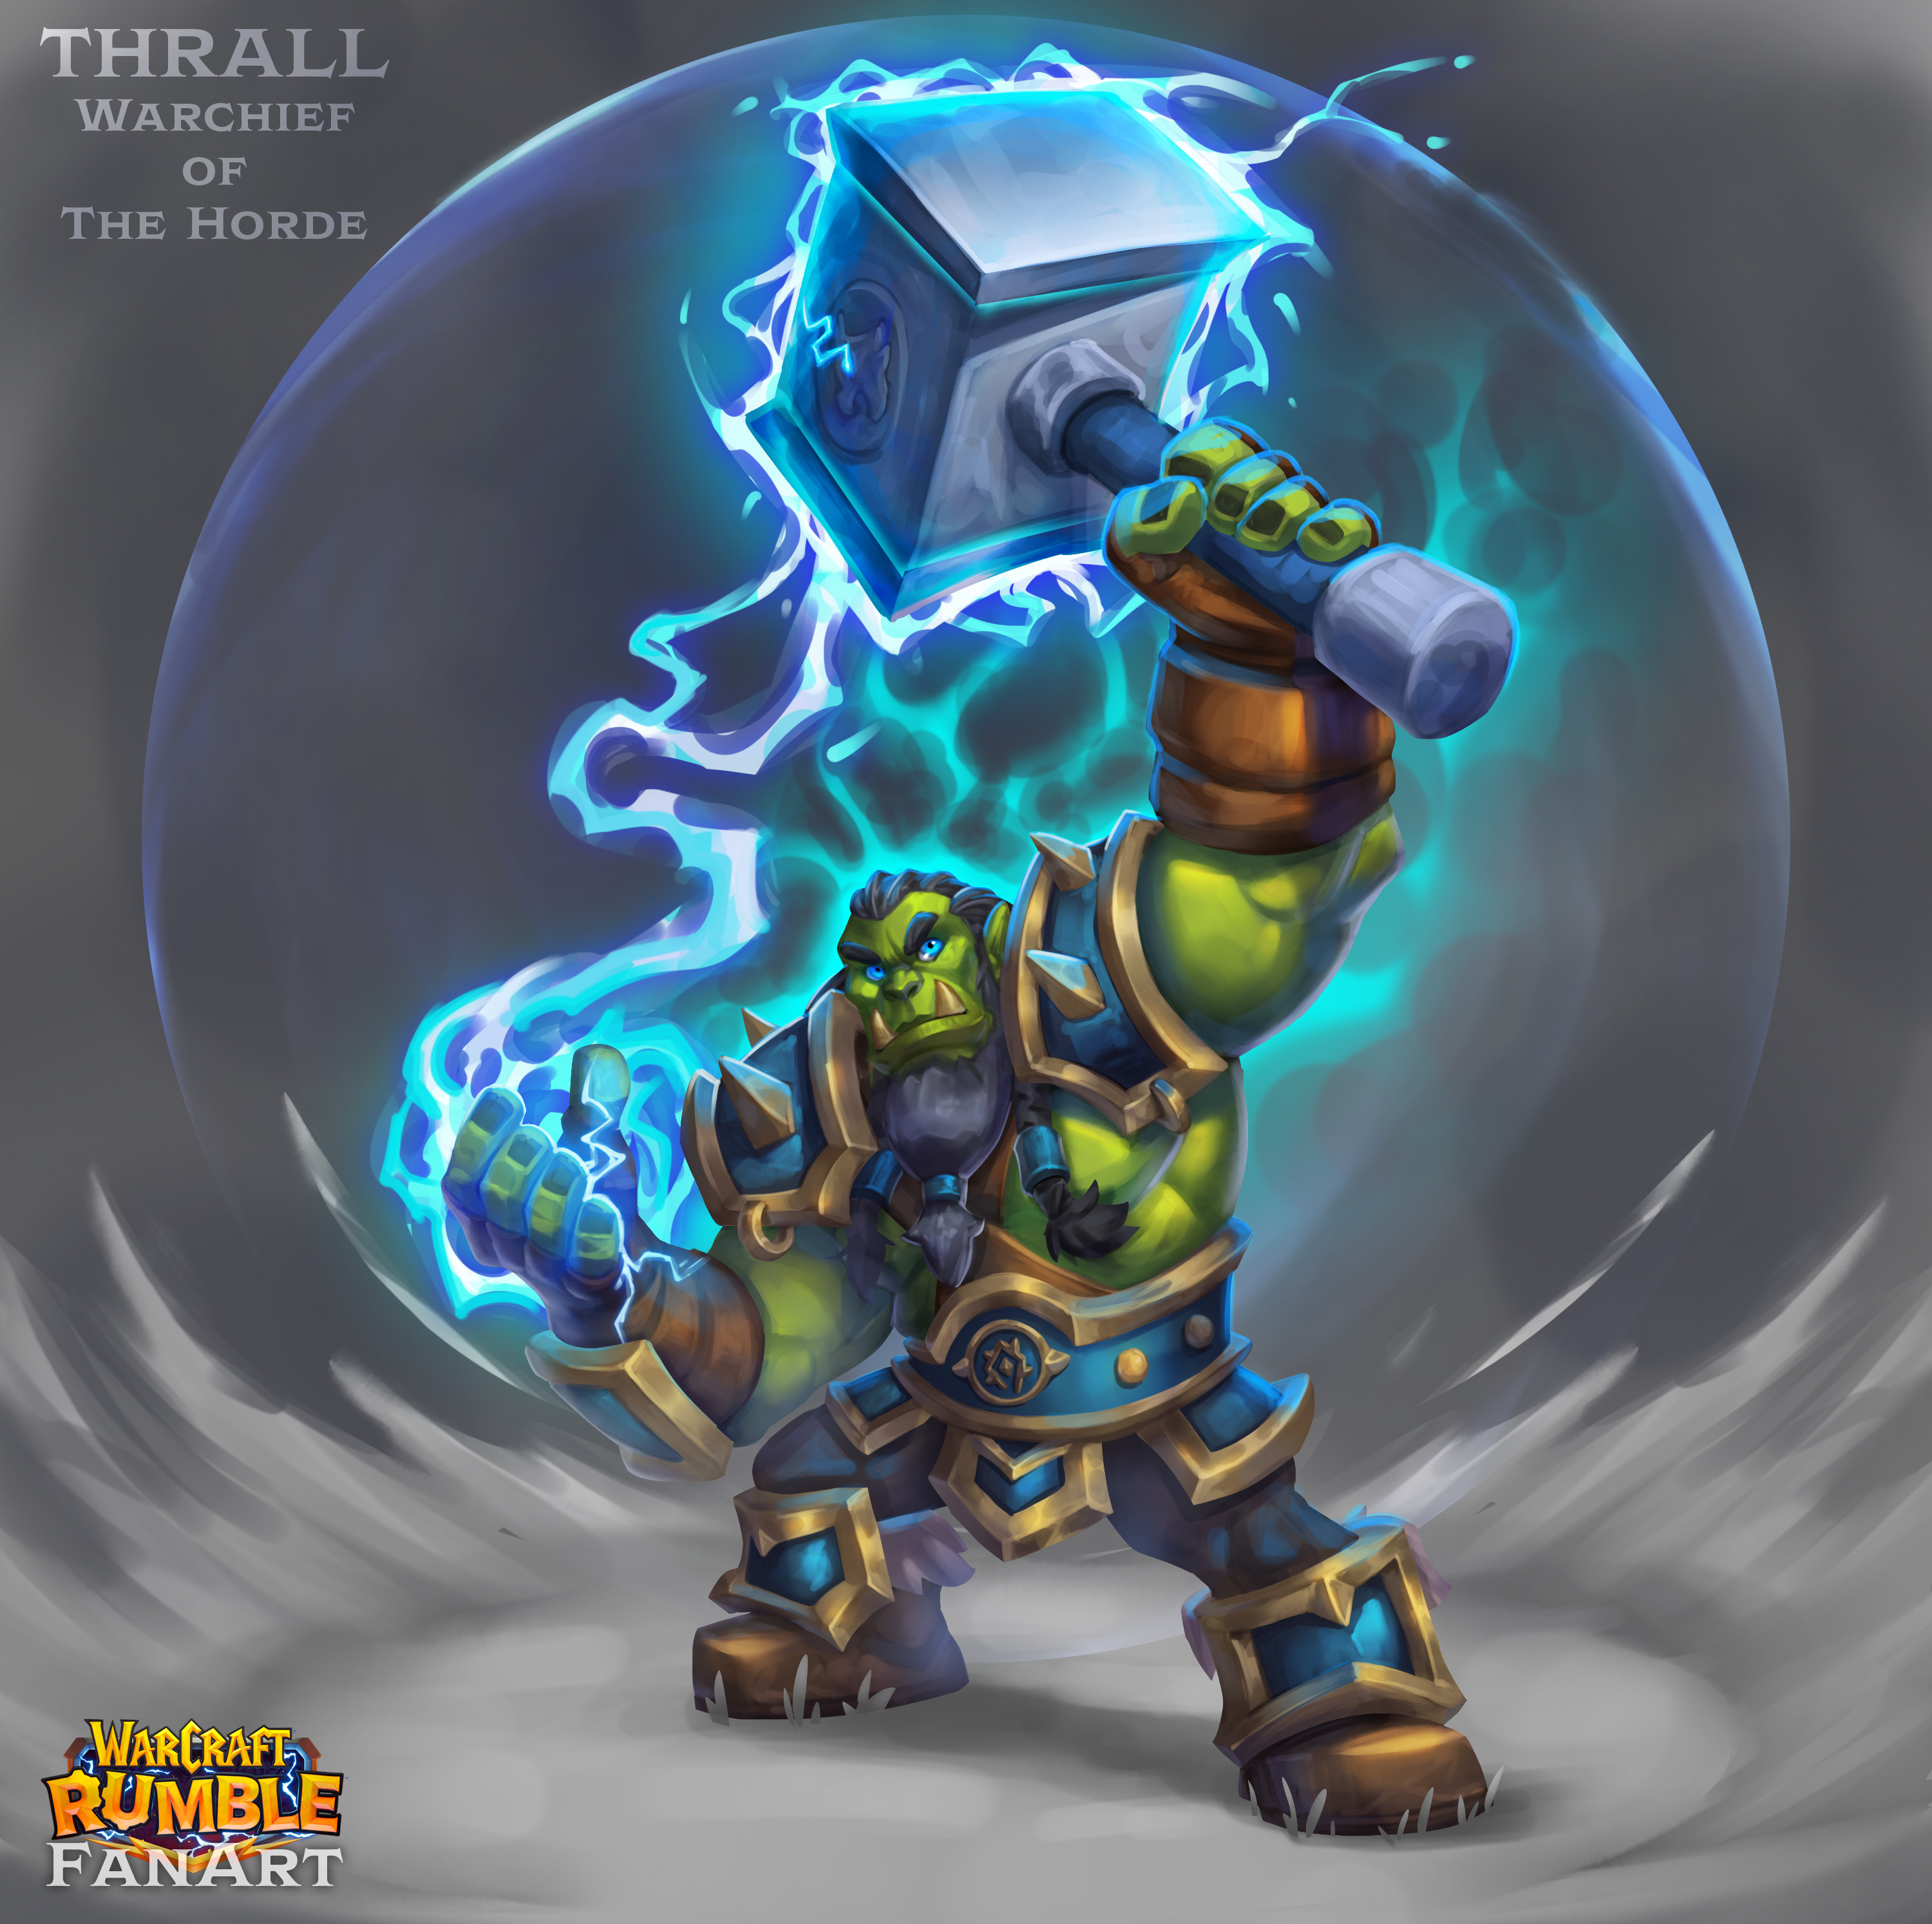 THRALL Warchief of the HORDE!